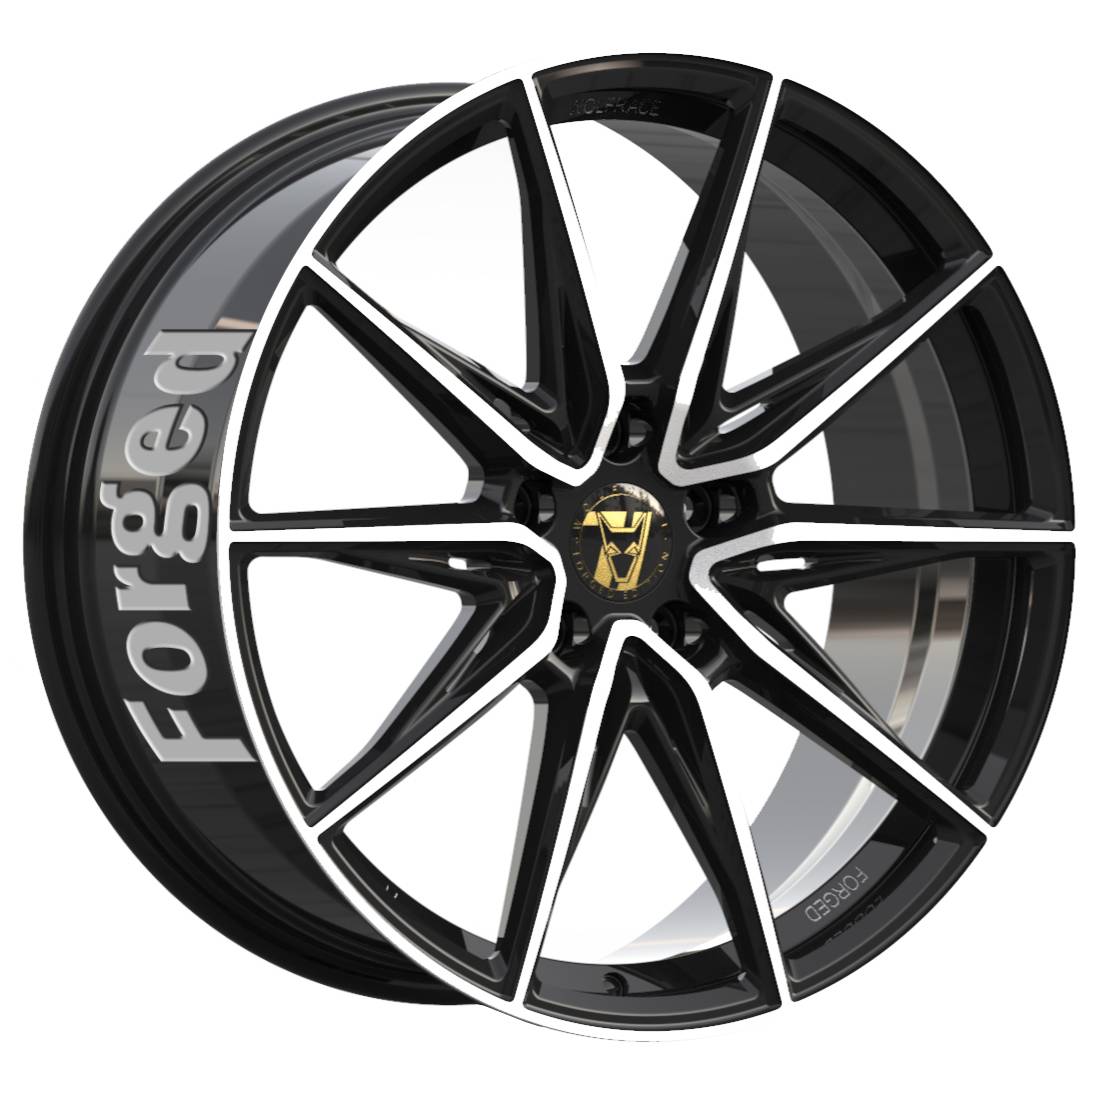 Jantes alu Demon Wheels 71 Forged Edition Urban Racer Forged [8.5x20] -5x114.3- ET 45